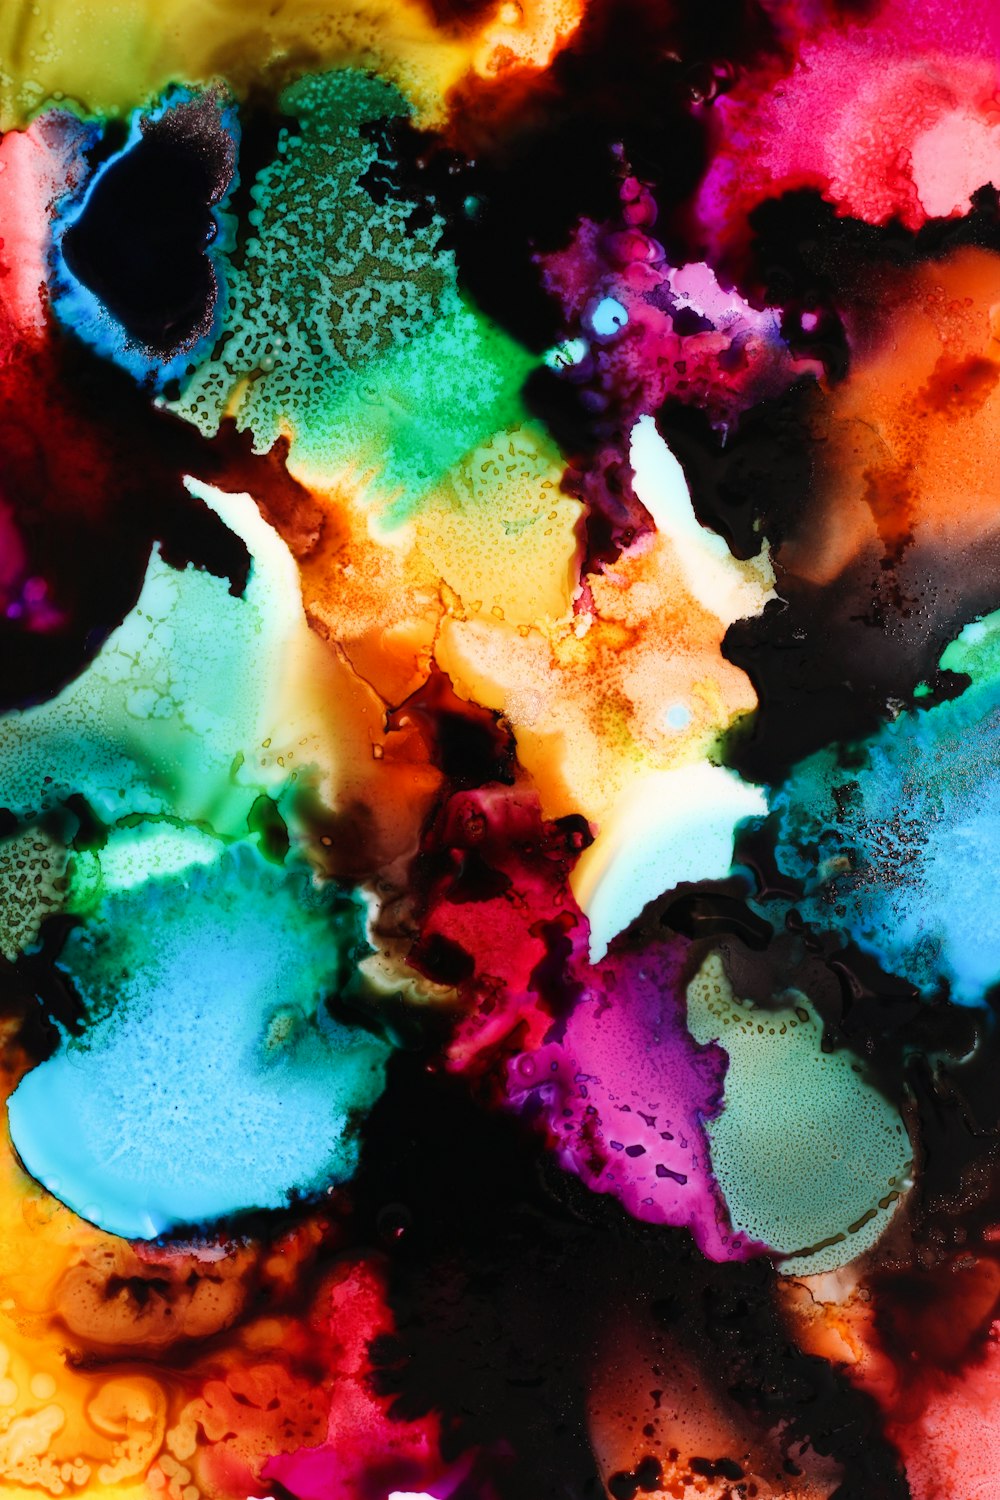 a close up of a multi colored substance